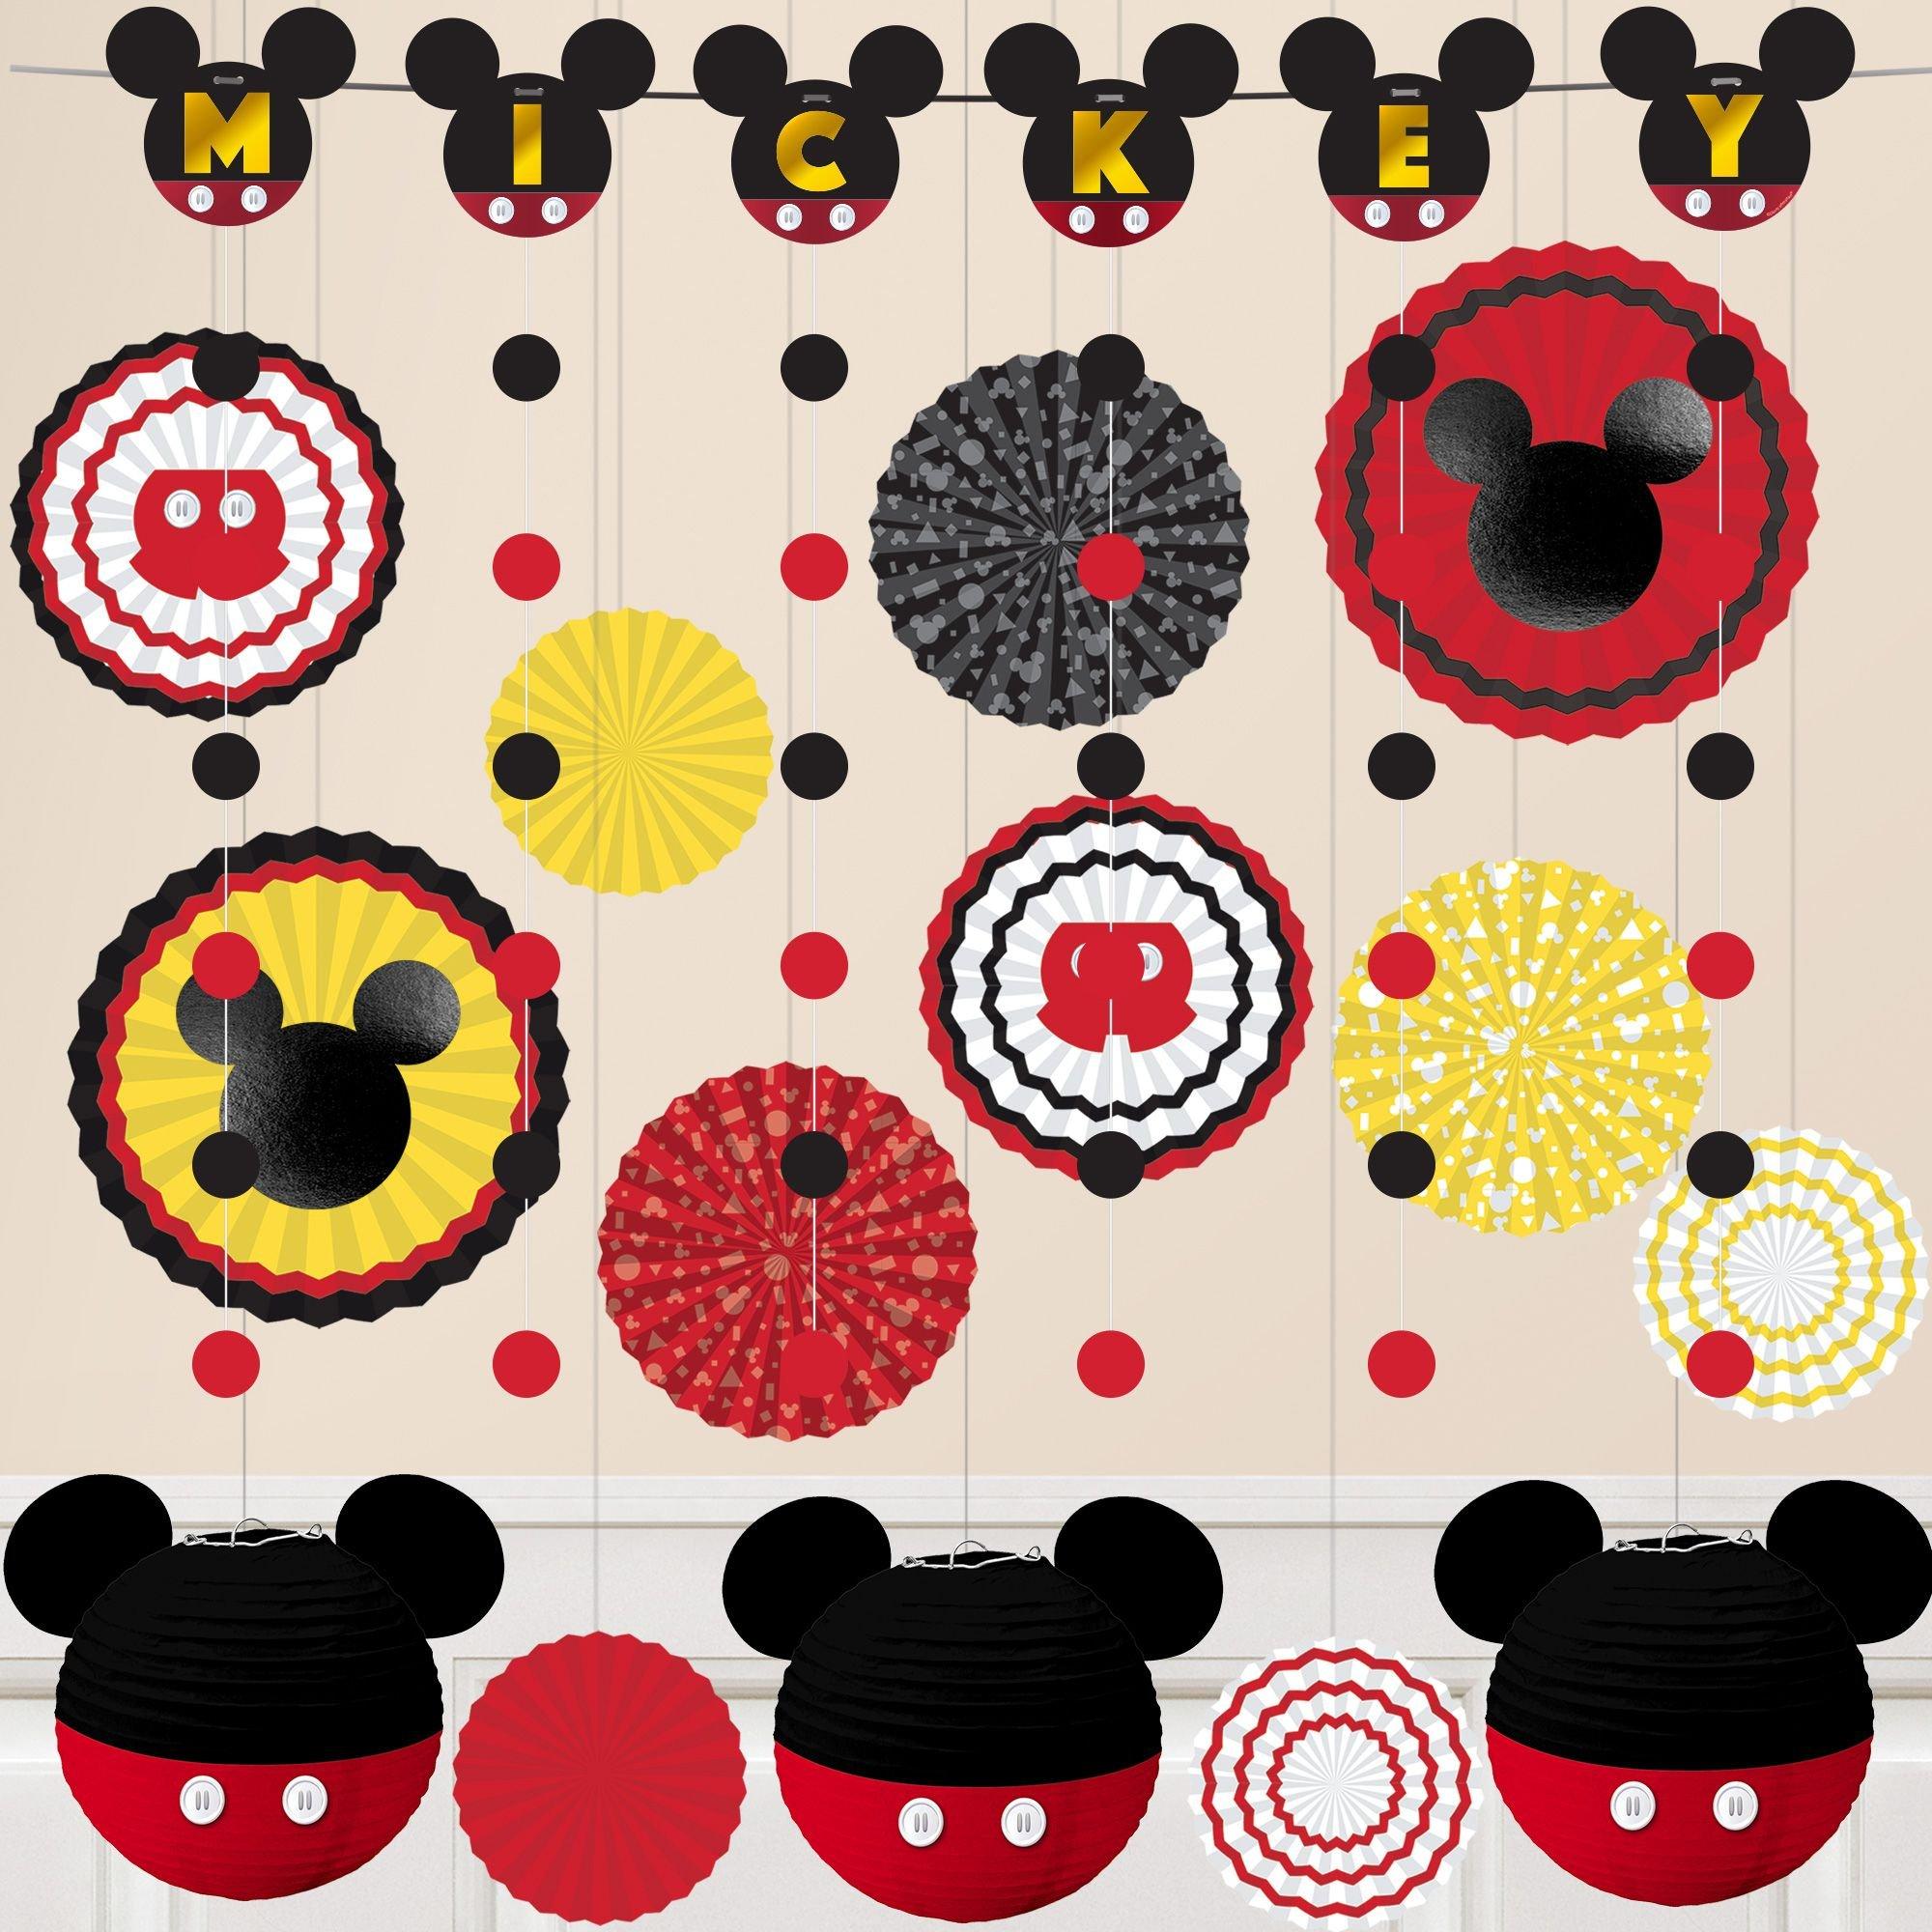 Mickey Mouse Forever Party Decorating Supplies Pack - Kit Includes Paper Lantern Decorations, String Garlands & Paper Fans